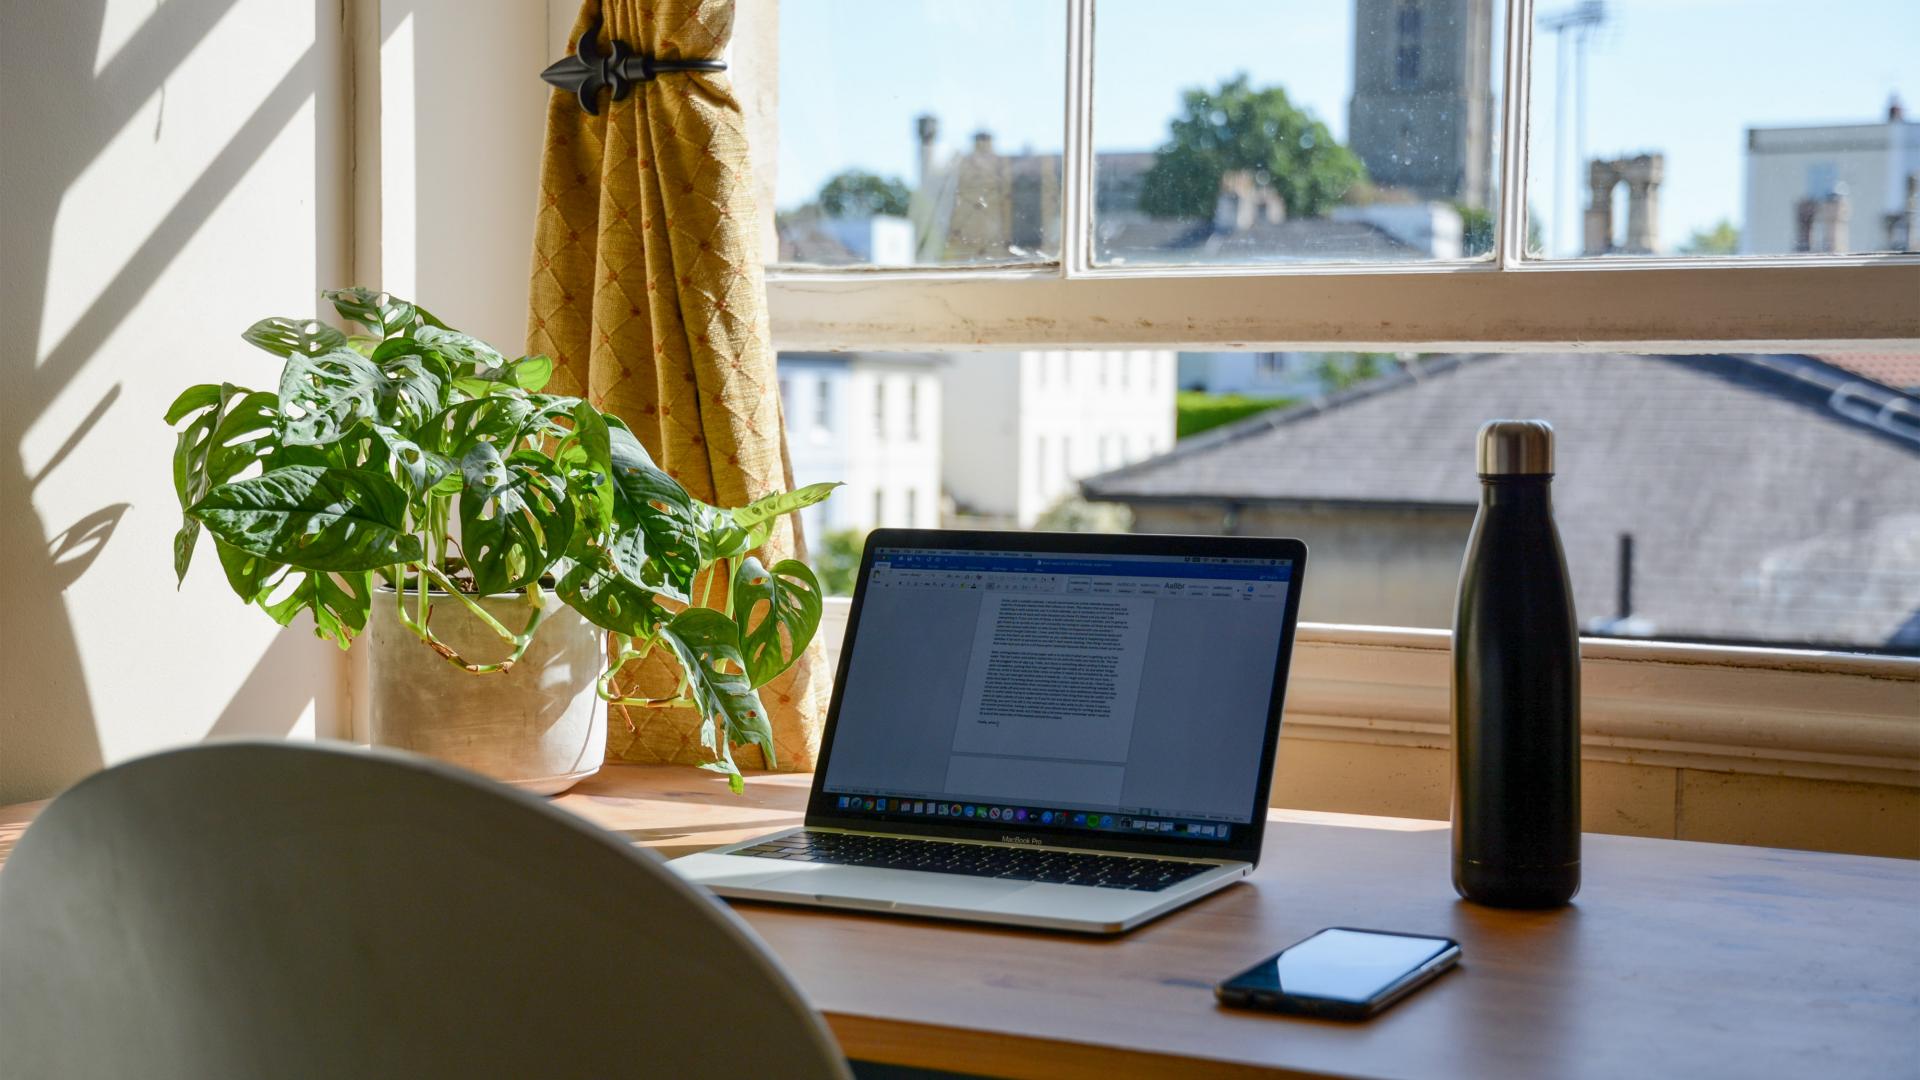 A desk with a laptop on, in front of a sunny window